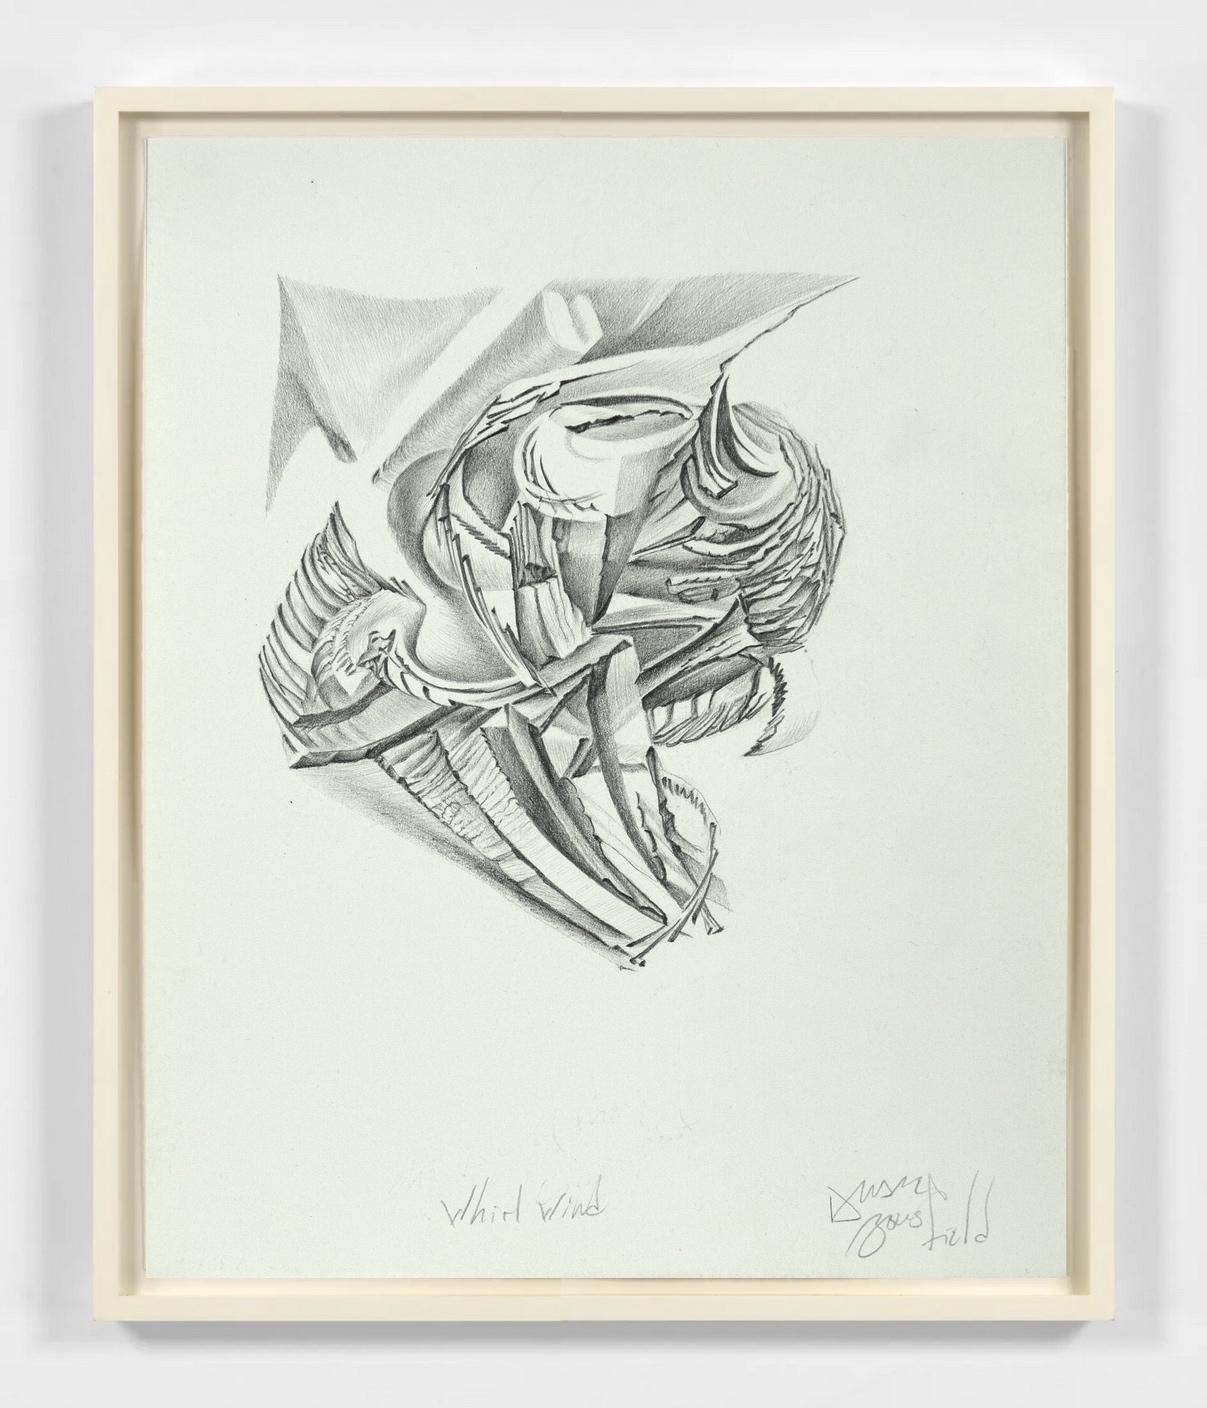 Duane Bousfield Abstract Drawing - Whirlwind